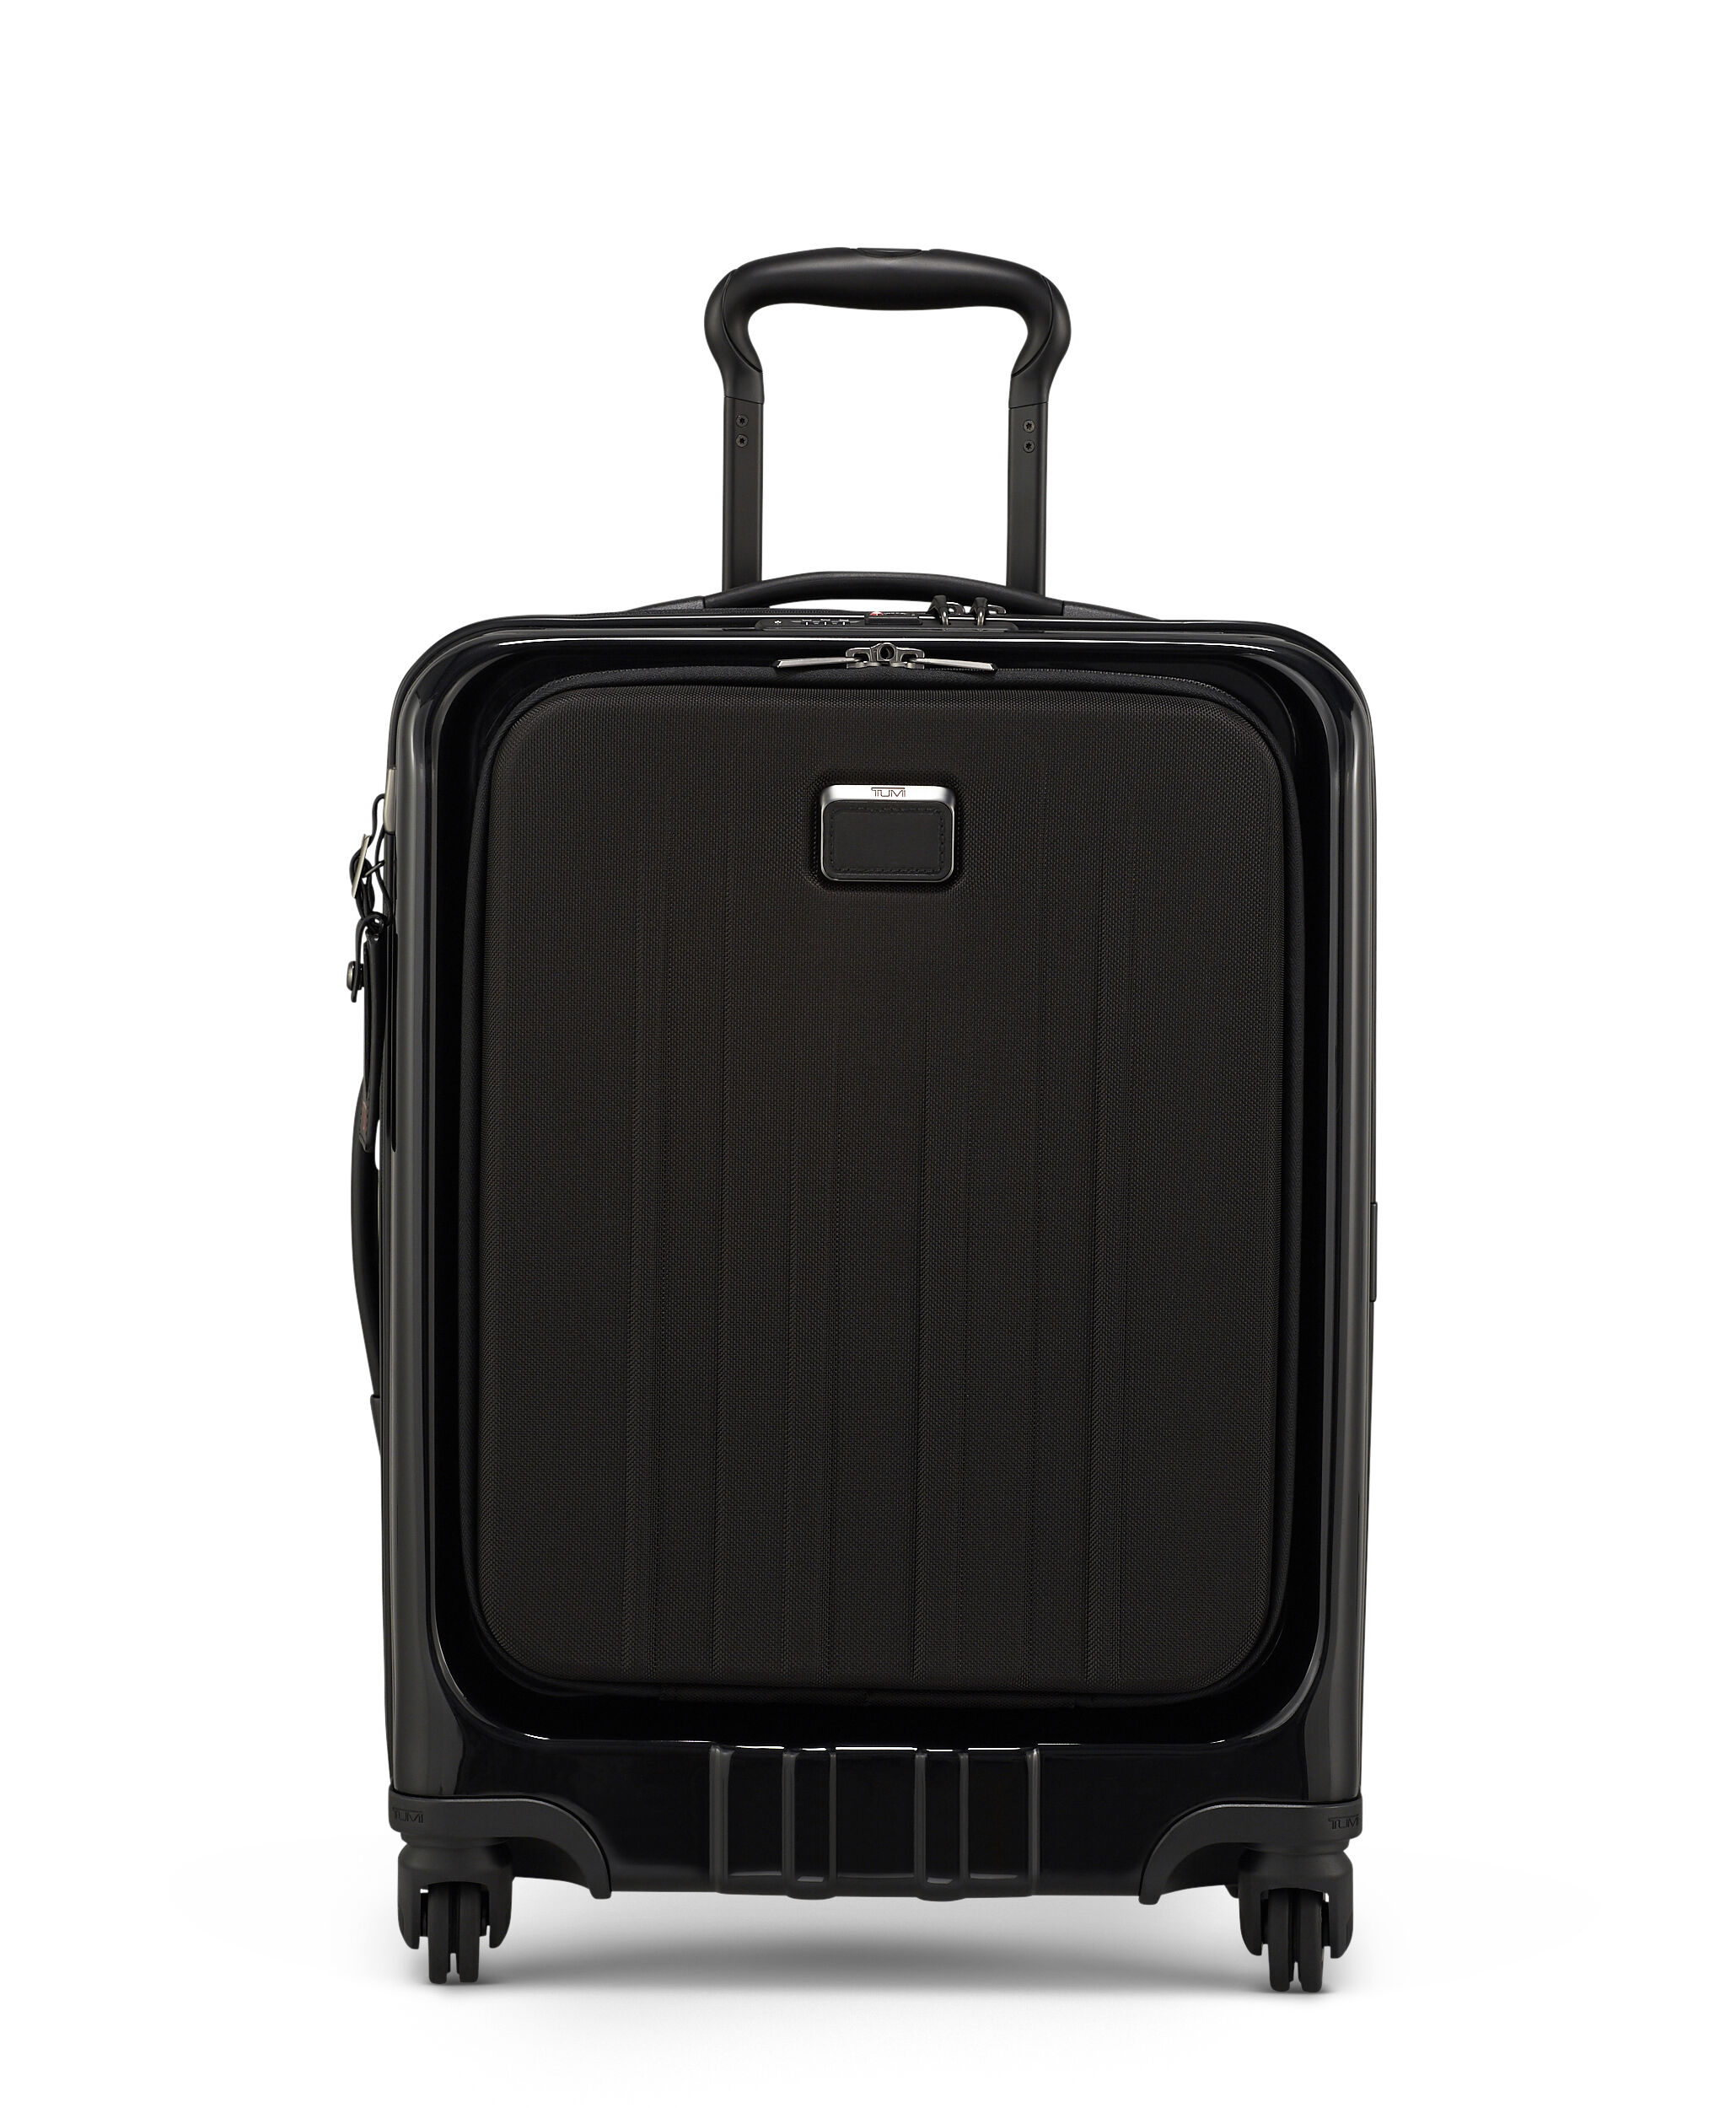 Carry On Luggage - Travel Rolling Luggage